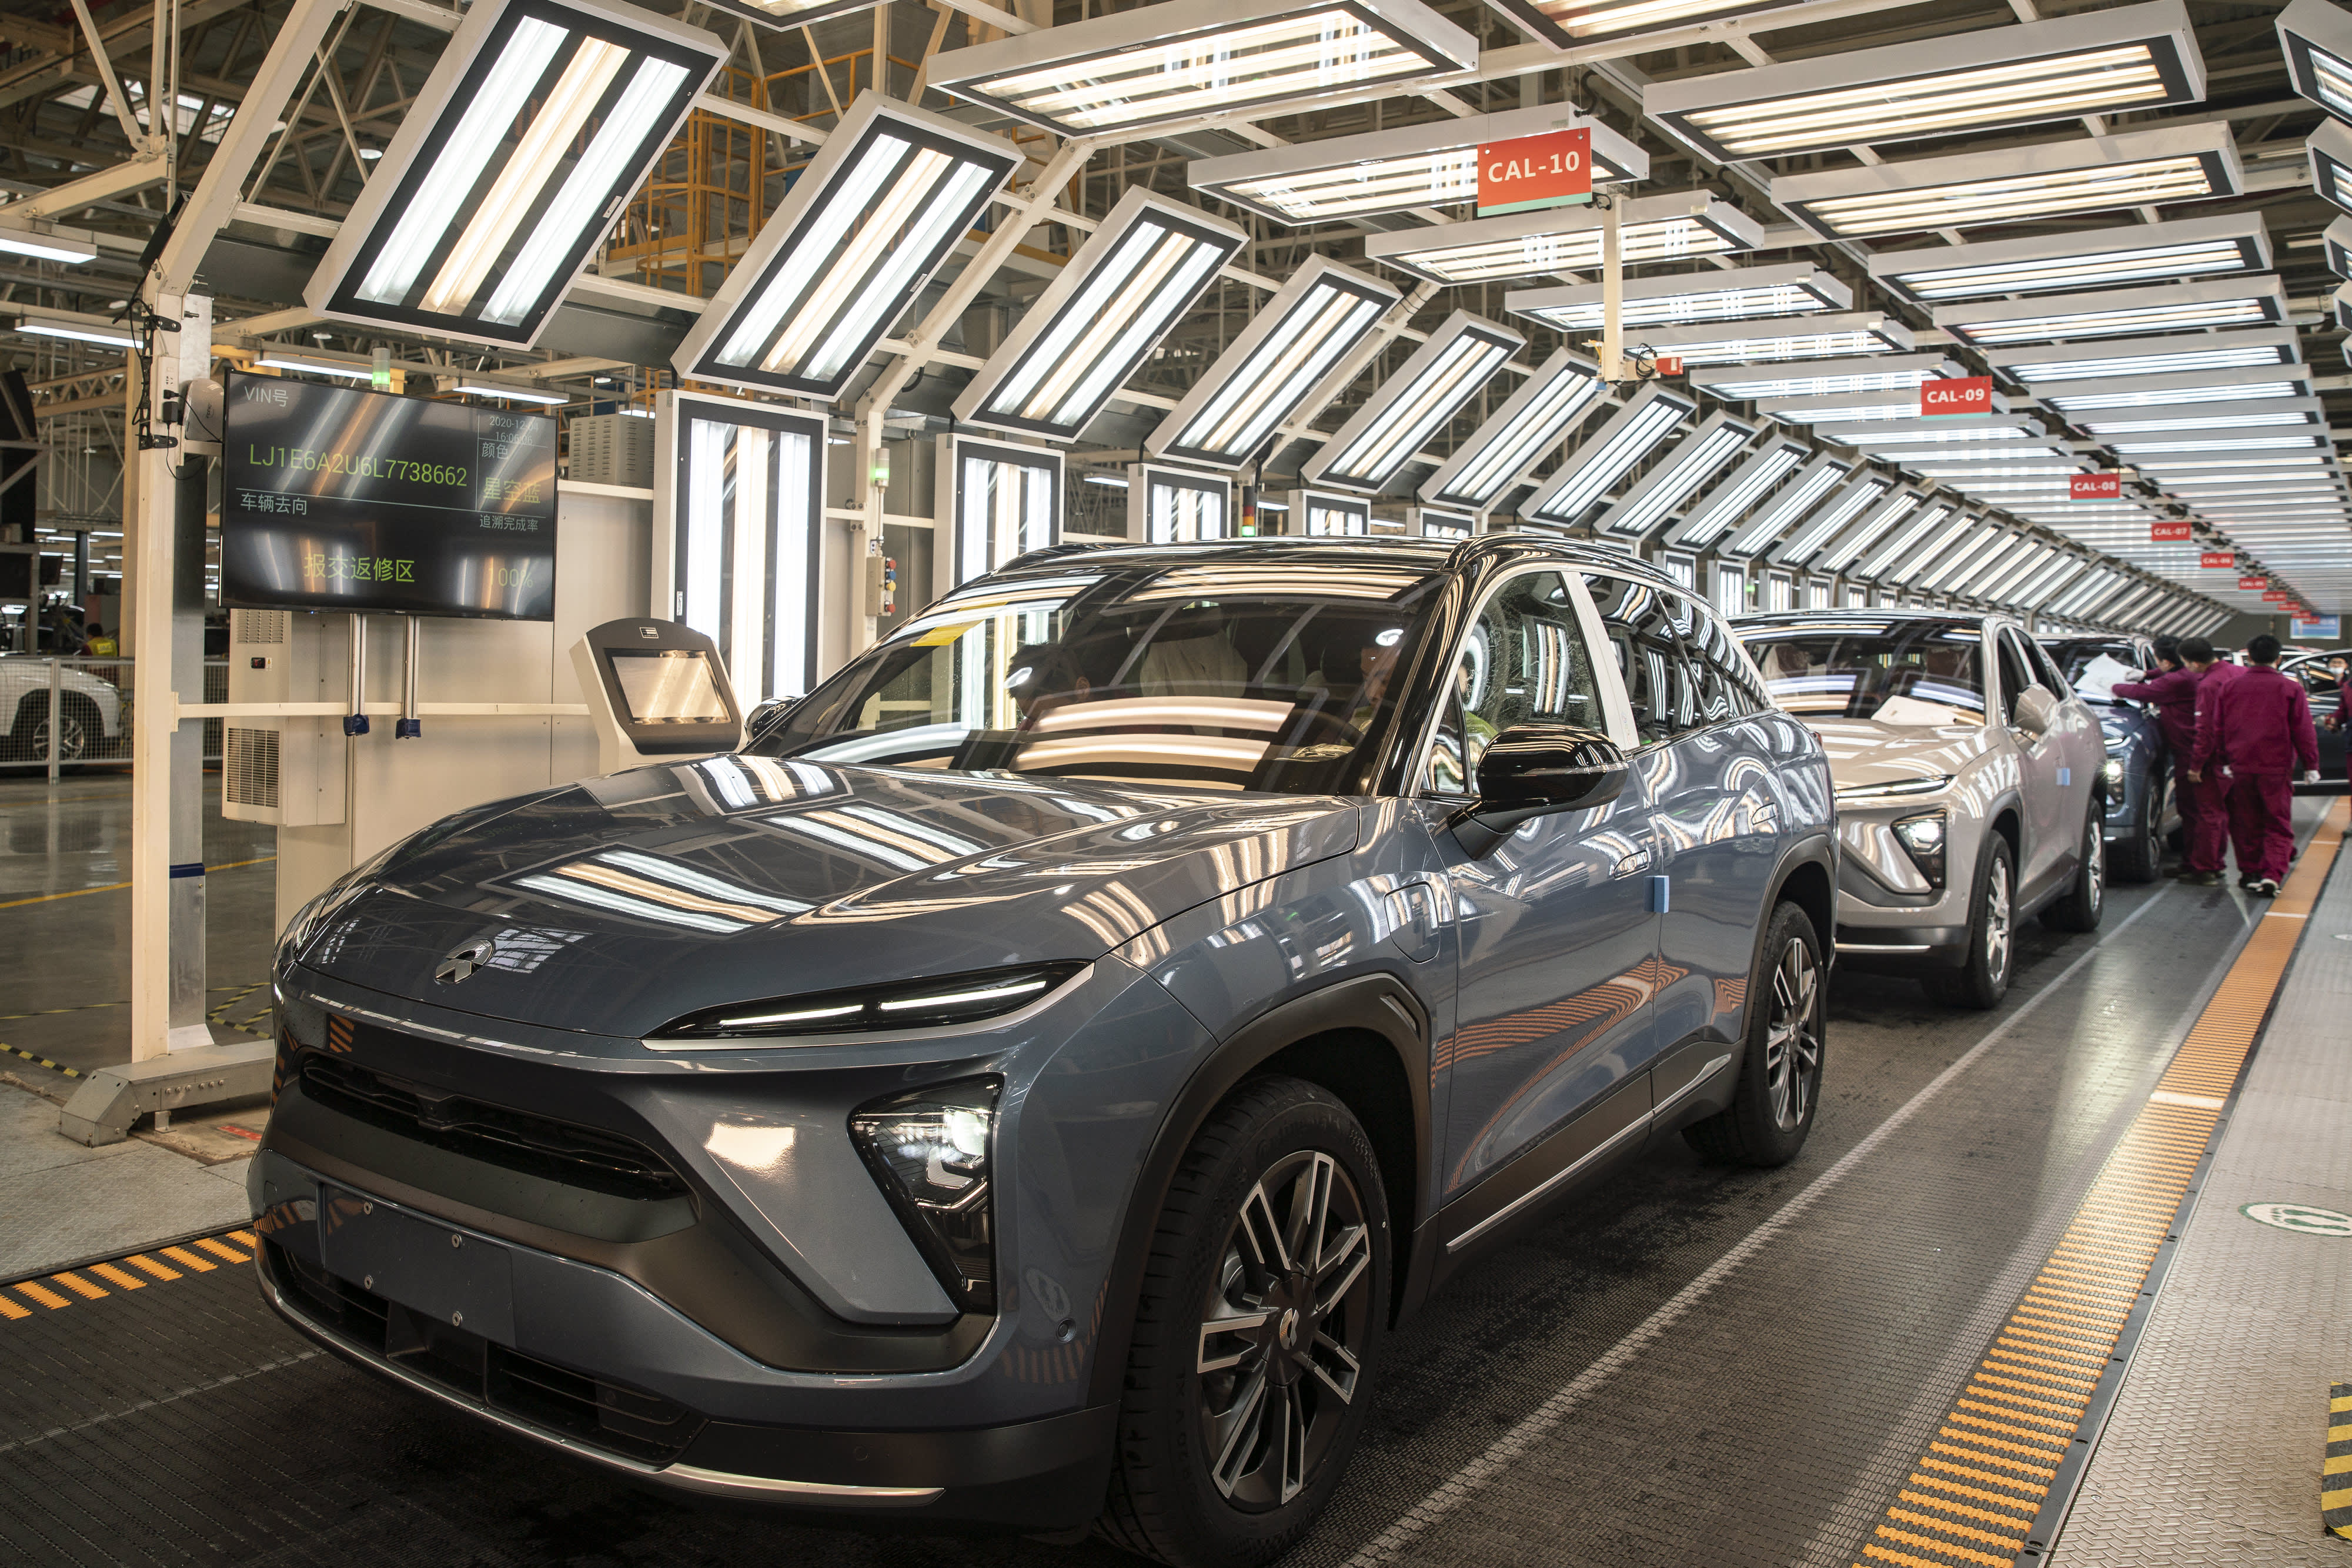 Nio and Tesla vie for dominance in China’s electric vehicle market